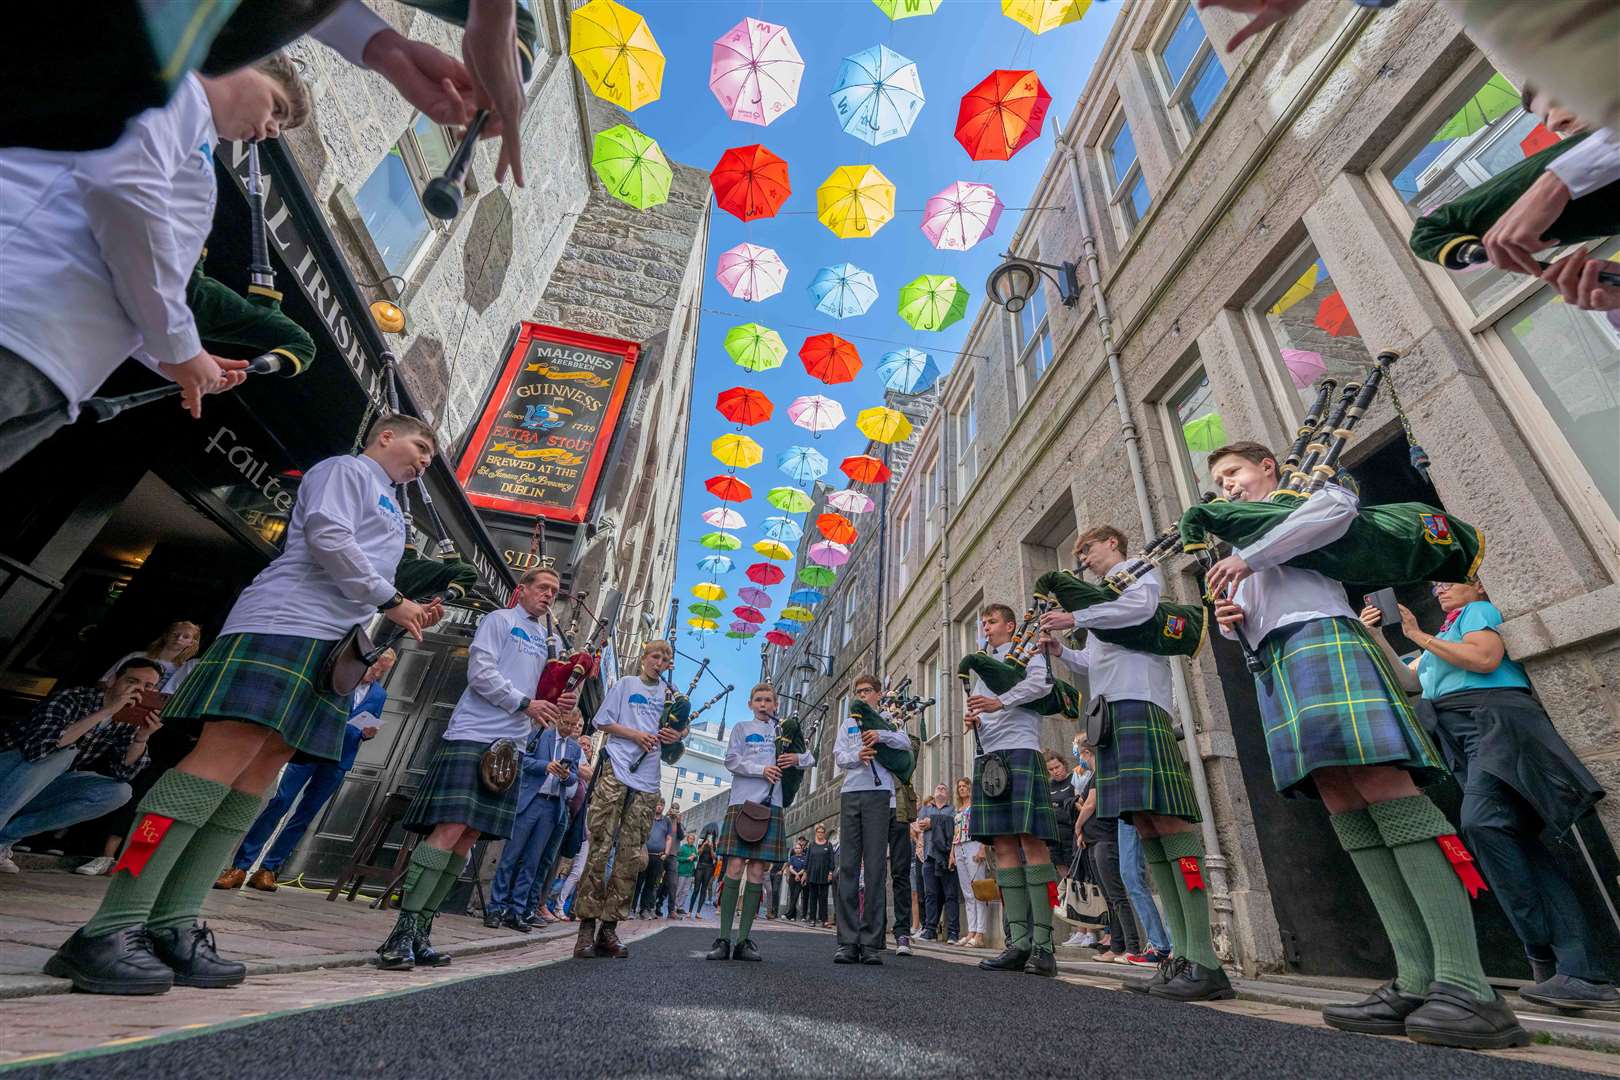 Aberdeen’s Umbrella Project will be launched in a blaze of colour, song and dance on Shiprow on Saturday, May 18.